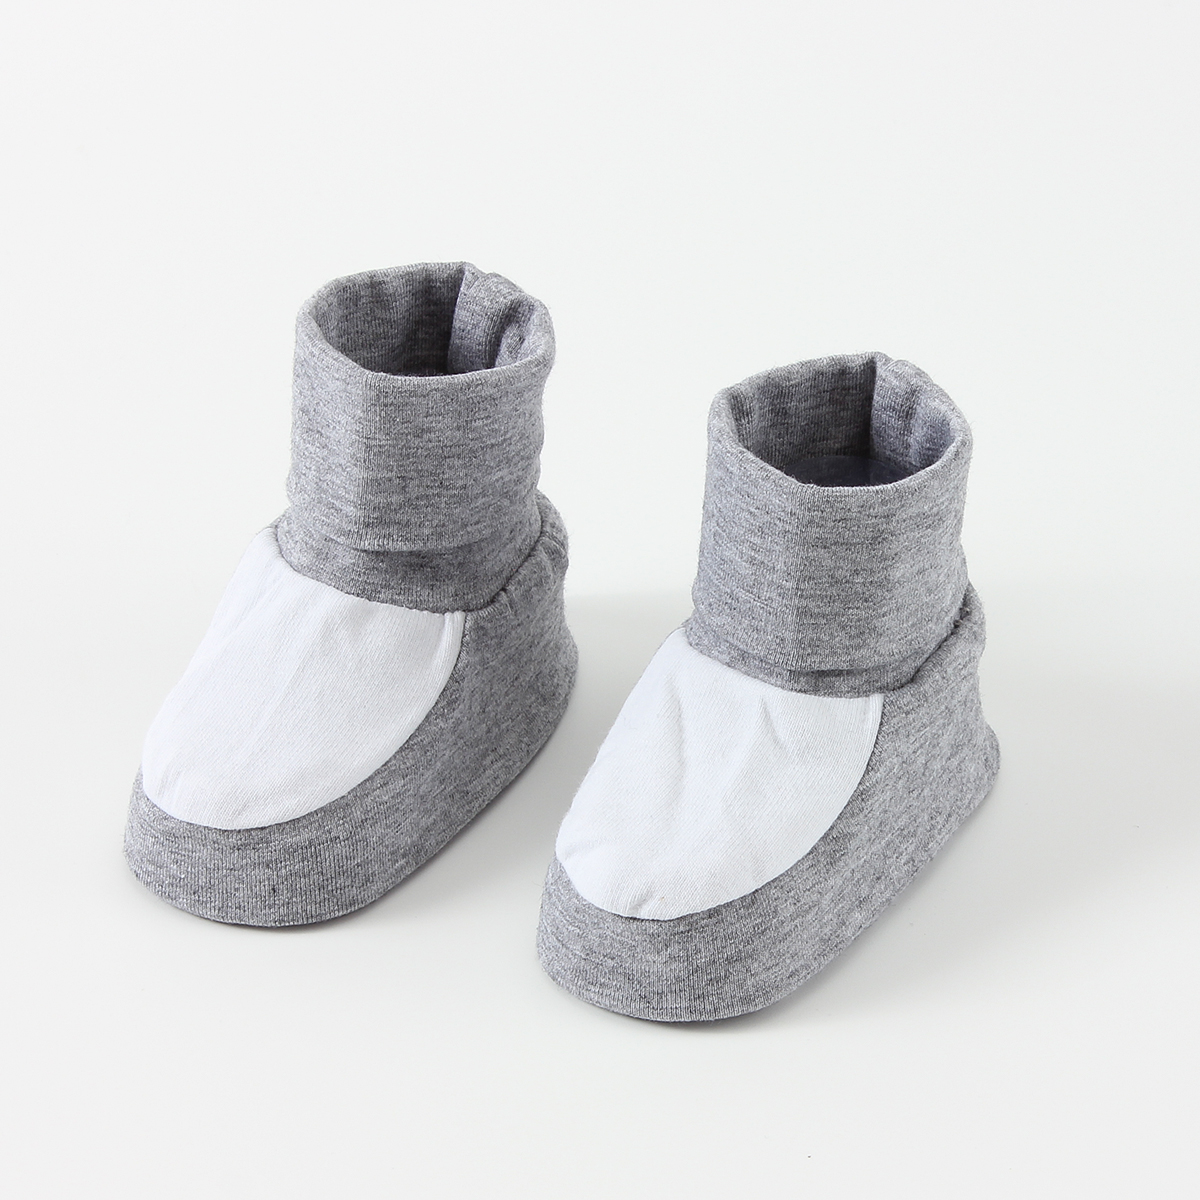 BH 7833 Beautiful Warm Baby Cap Shoes Suit